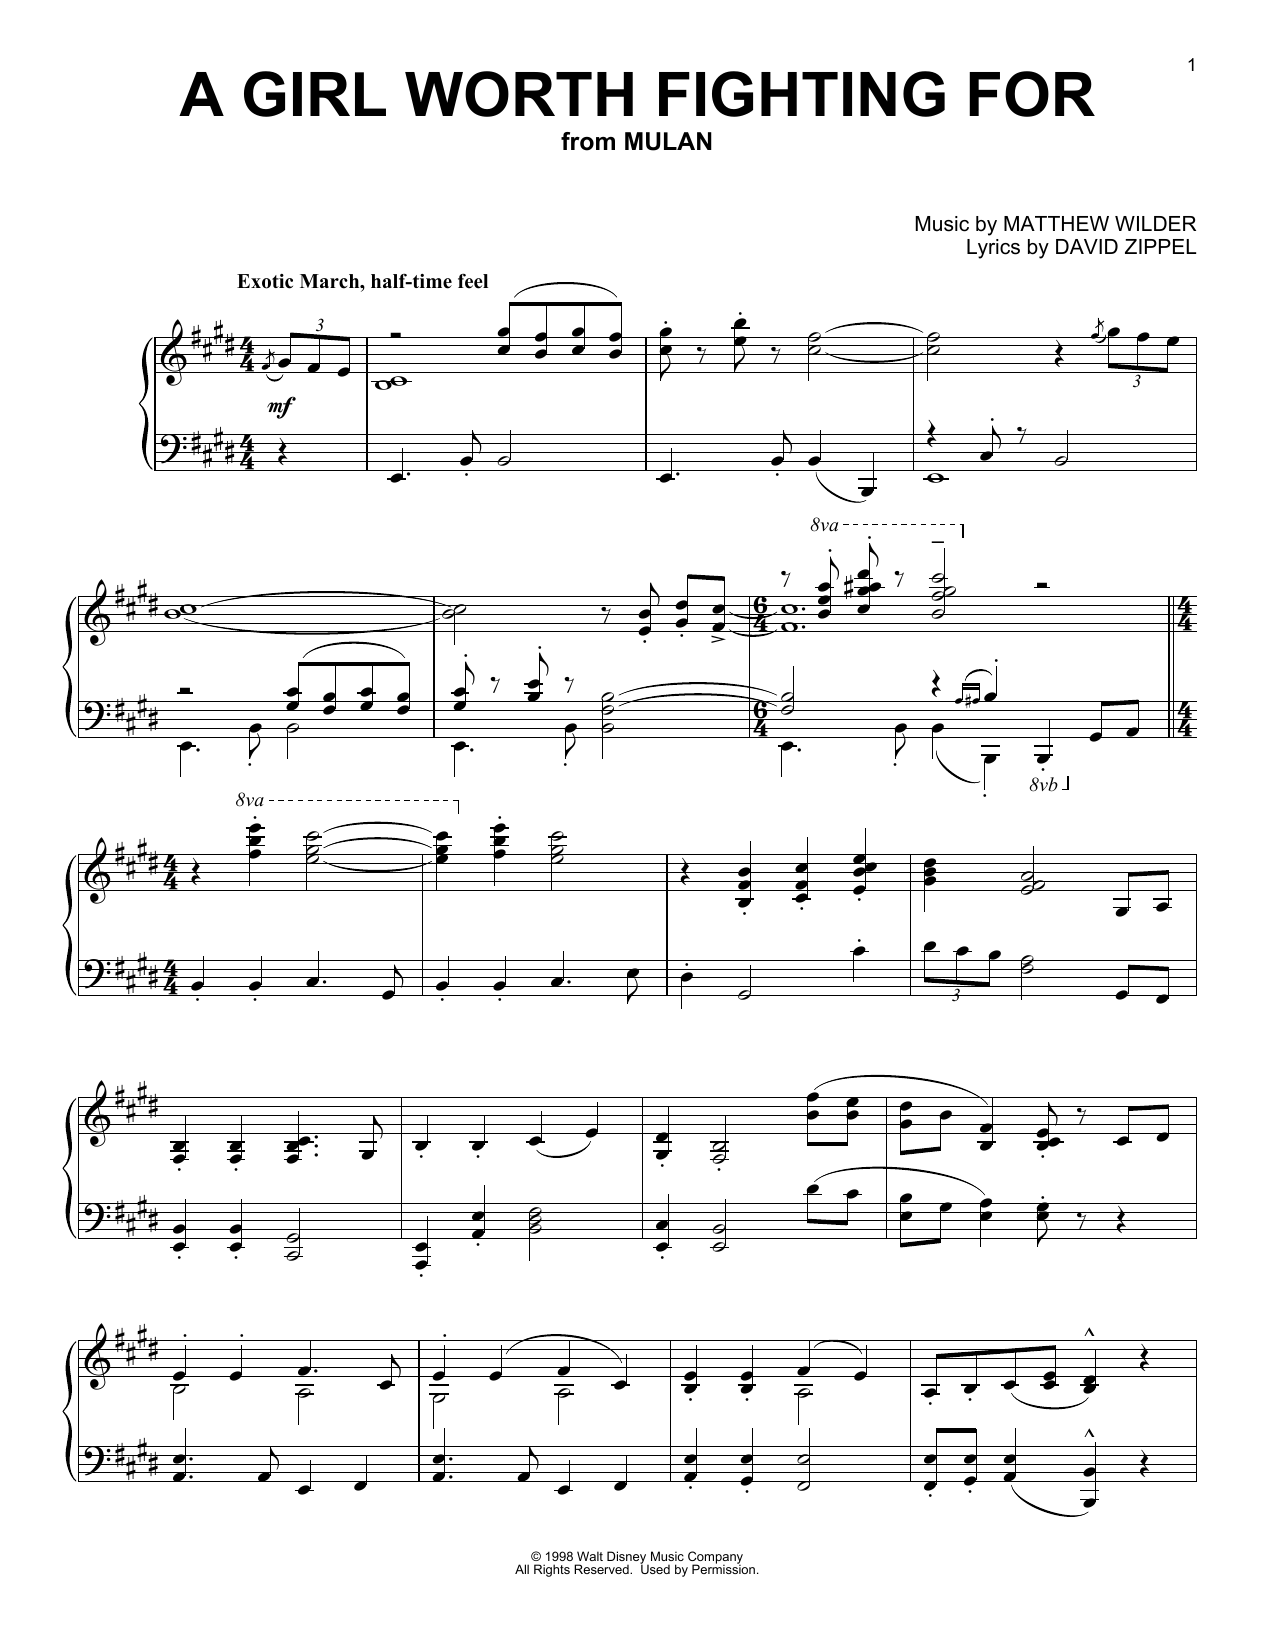 Download David Zippel A Girl Worth Fighting For (from Mulan) Sheet Music